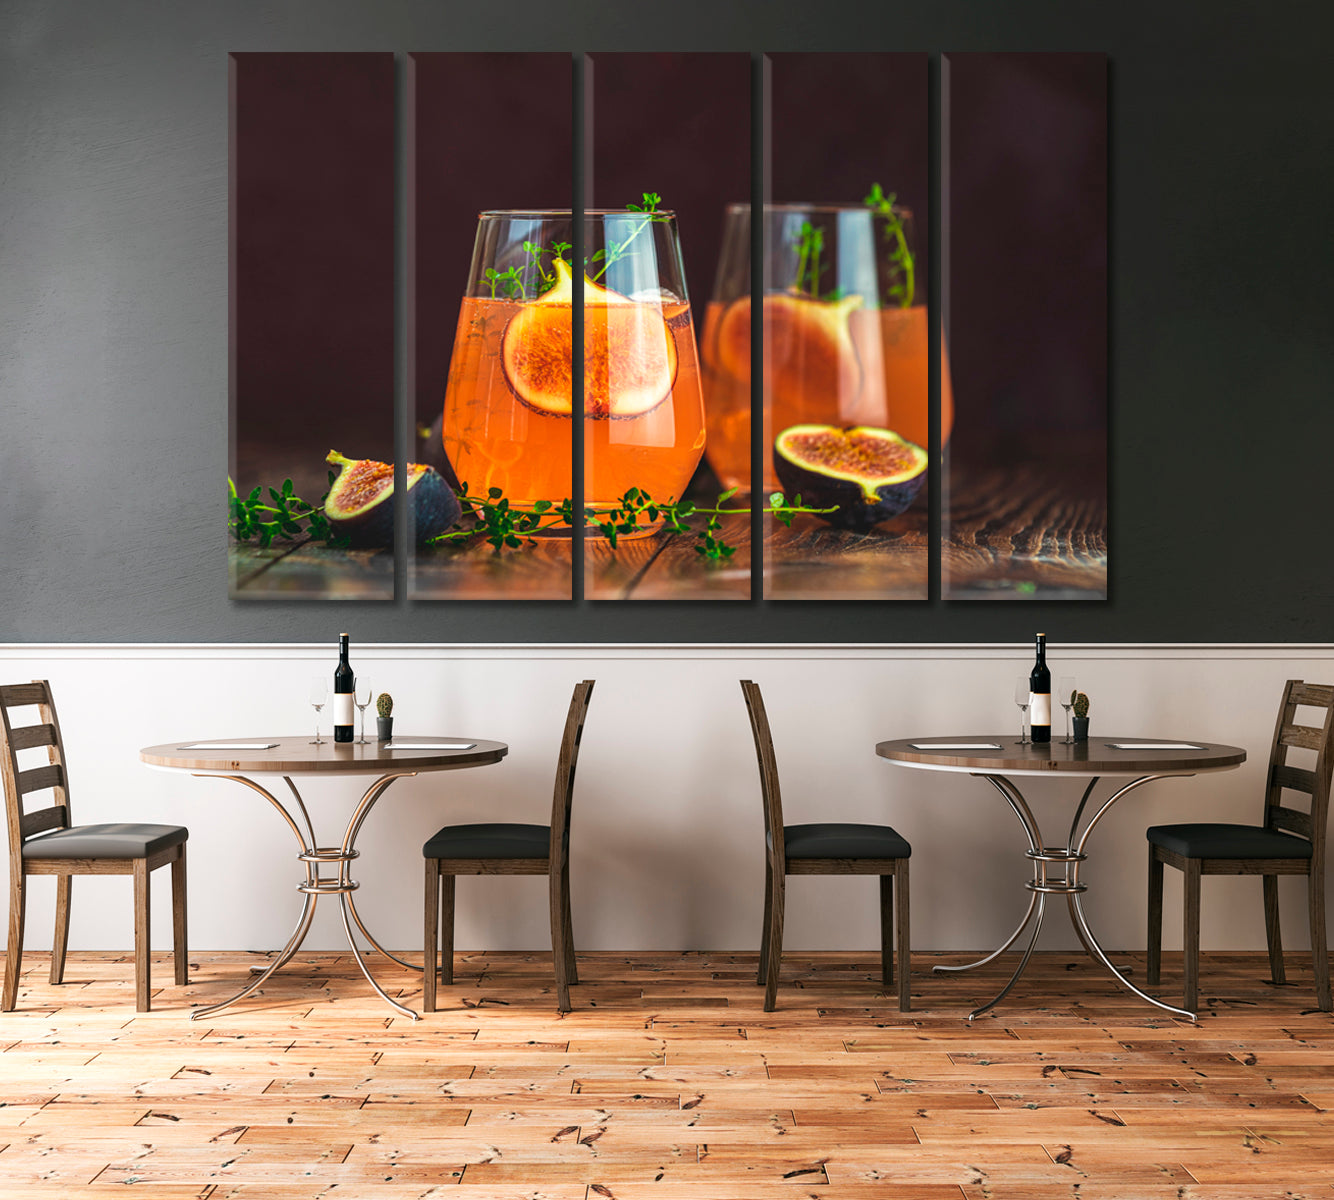 Summer Juice and Figs Canvas Print-Canvas Print-CetArt-1 Panel-24x16 inches-CetArt